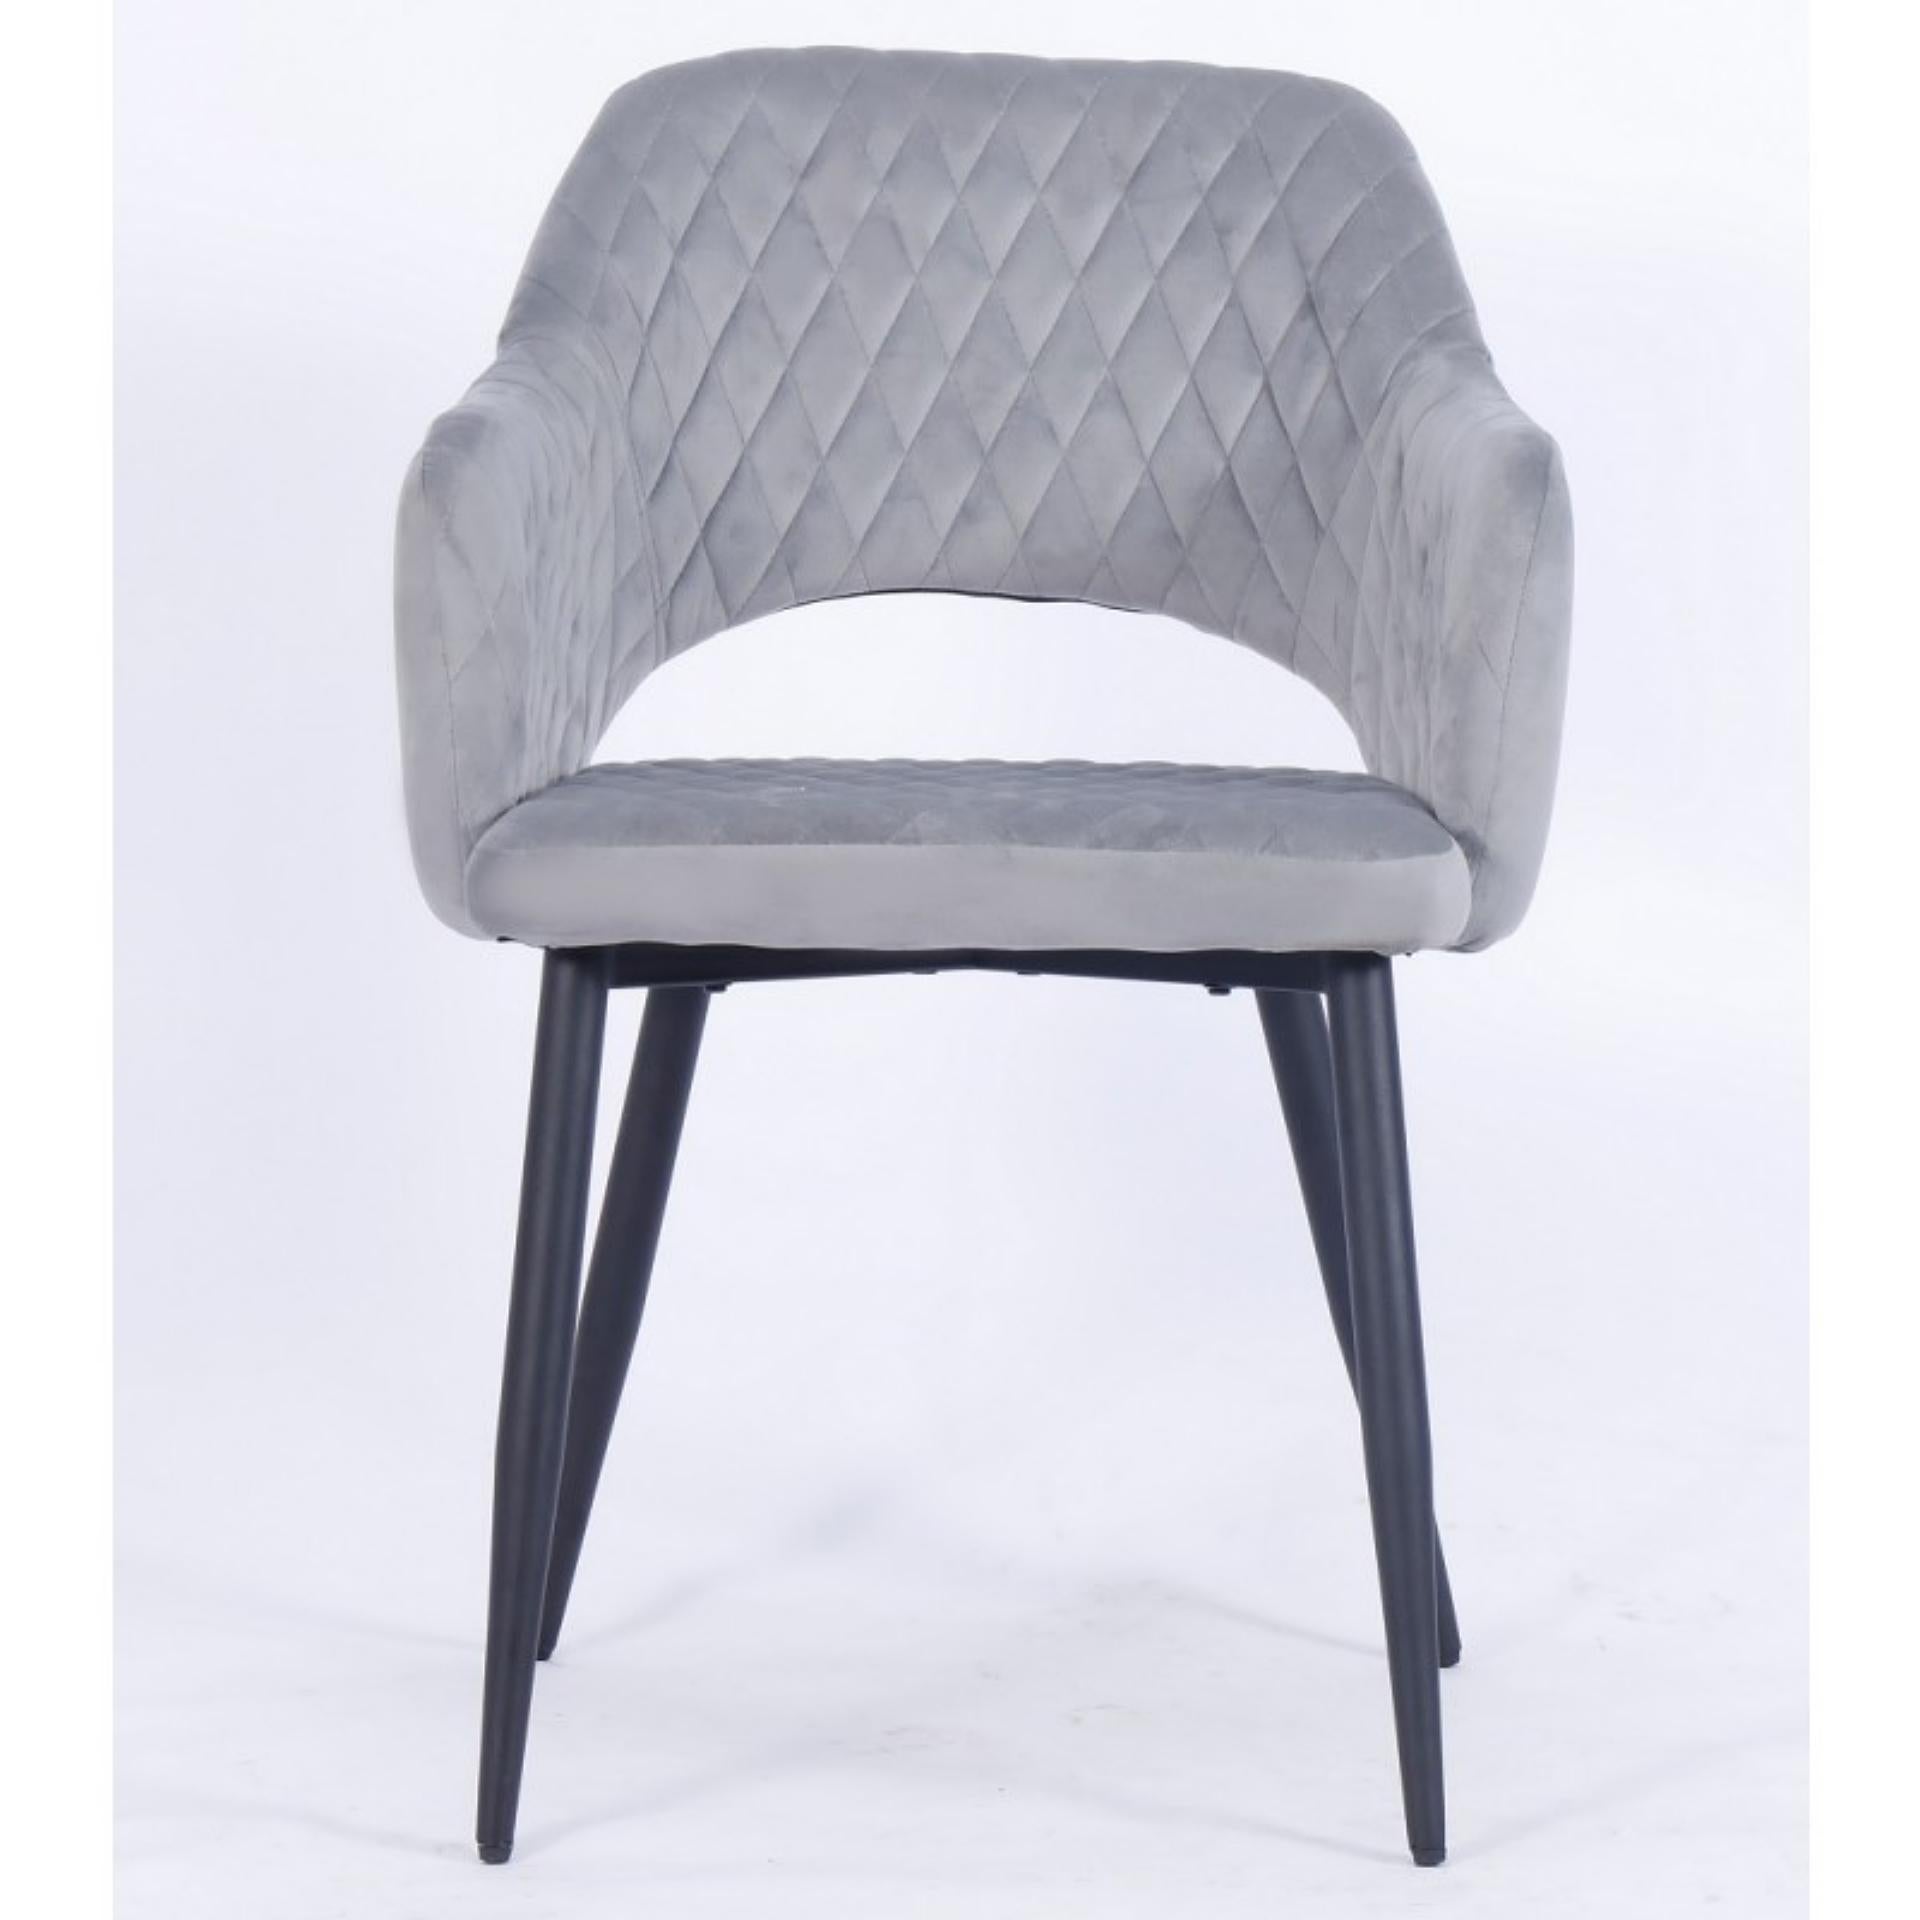 Hand-Crafted Pair of Metal Velvet Upholstered Metal Armchair New For Sale